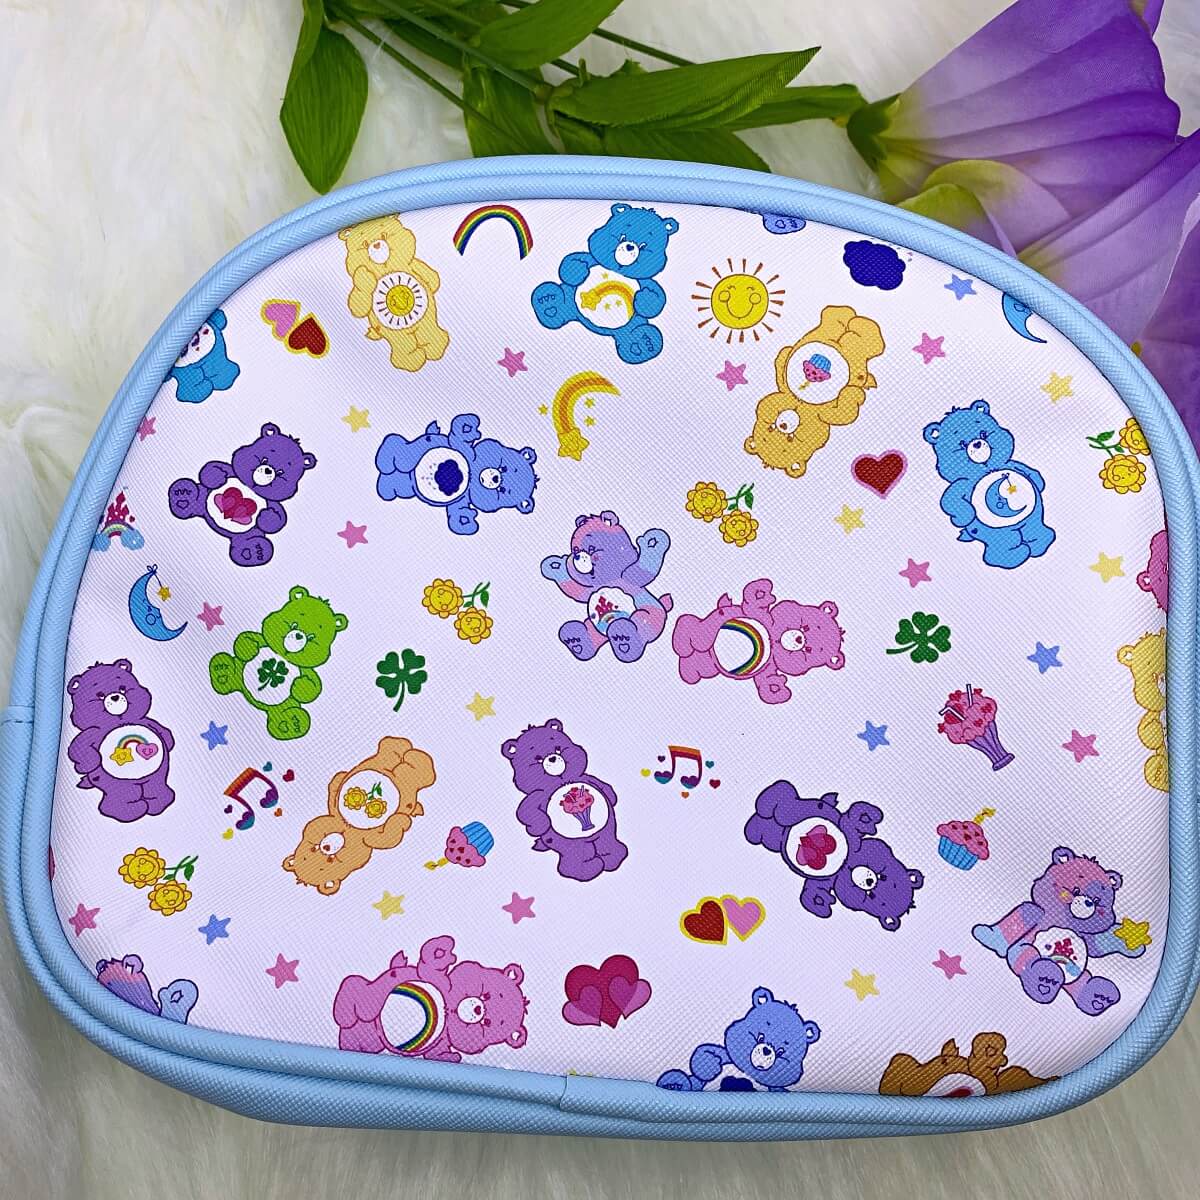 wet n wild Care Bears Handle With Care Makeup Bag